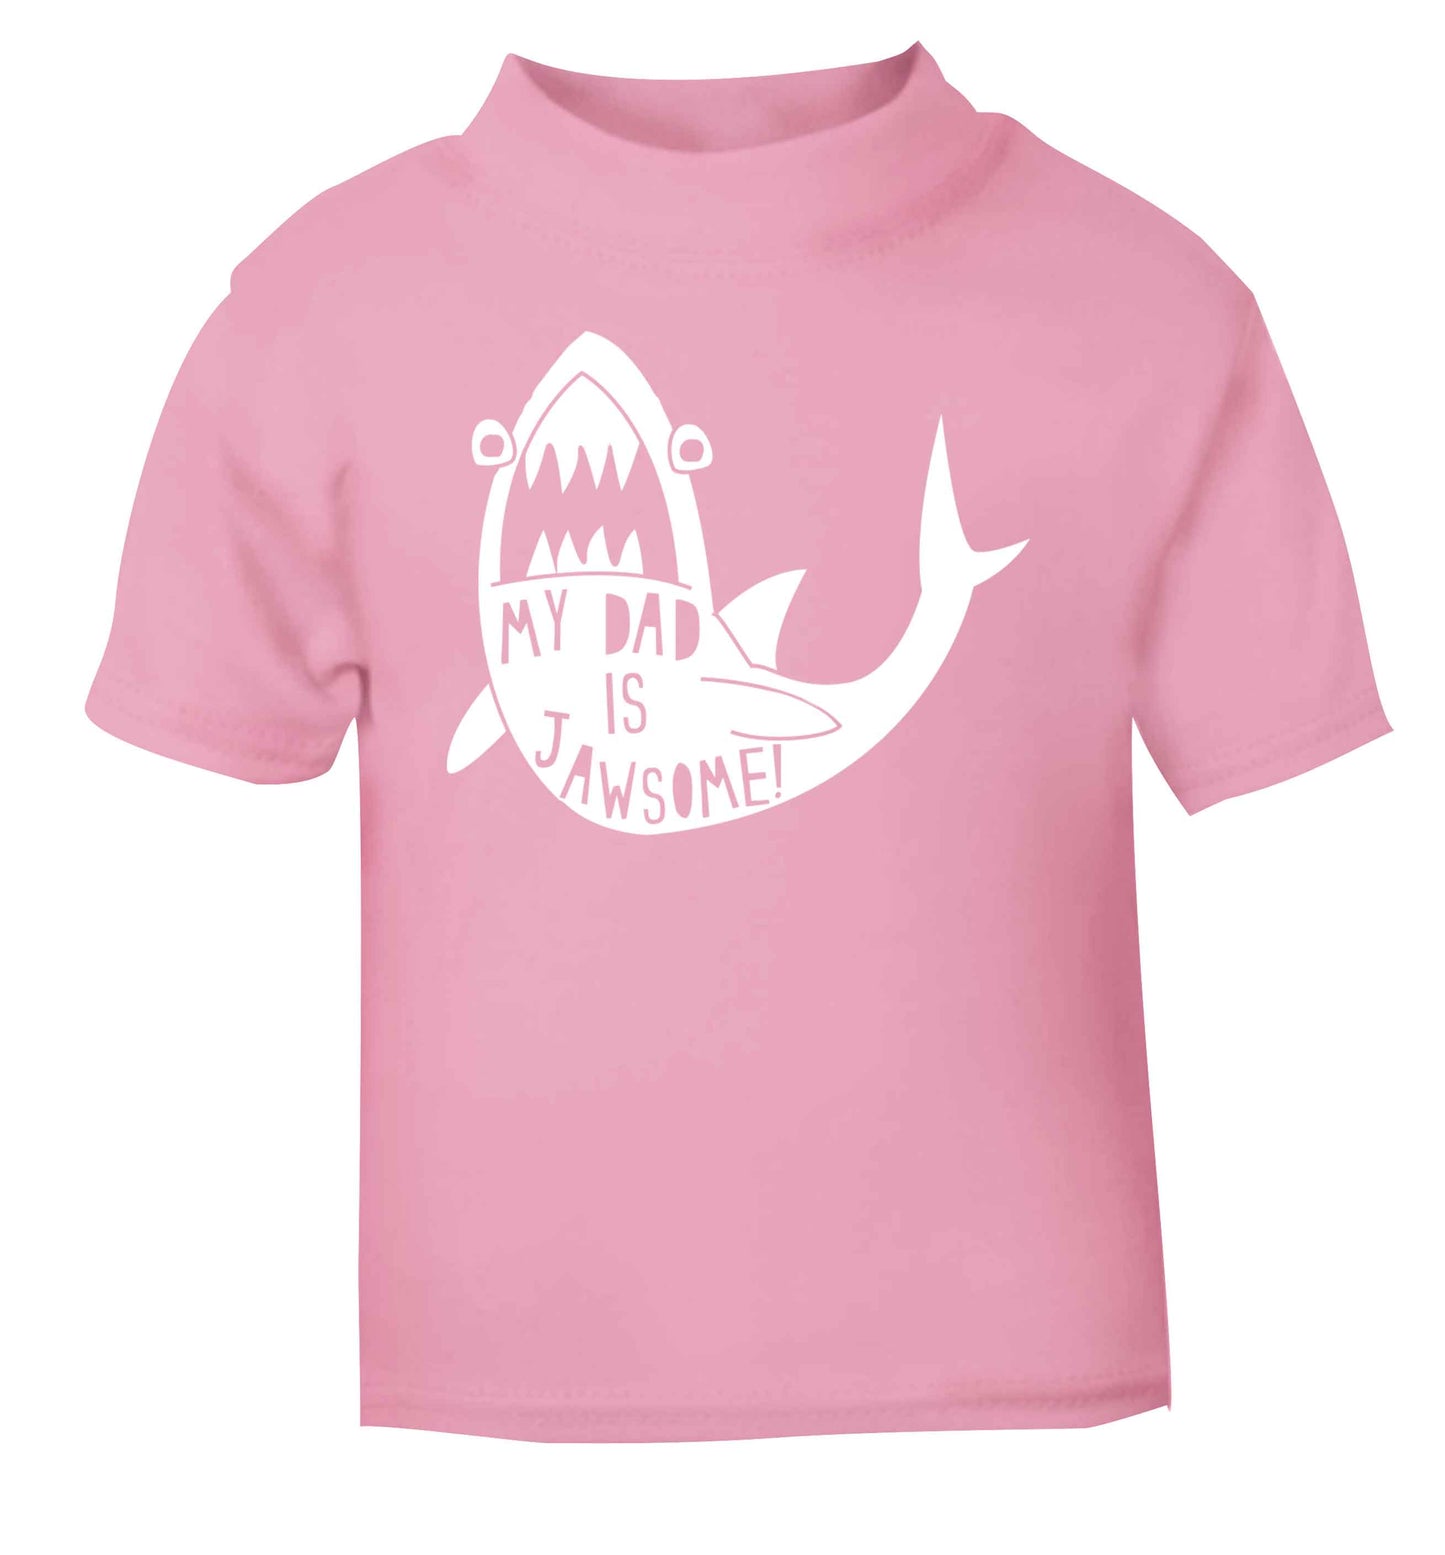 My Dad is jawsome light pink baby toddler Tshirt 2 Years